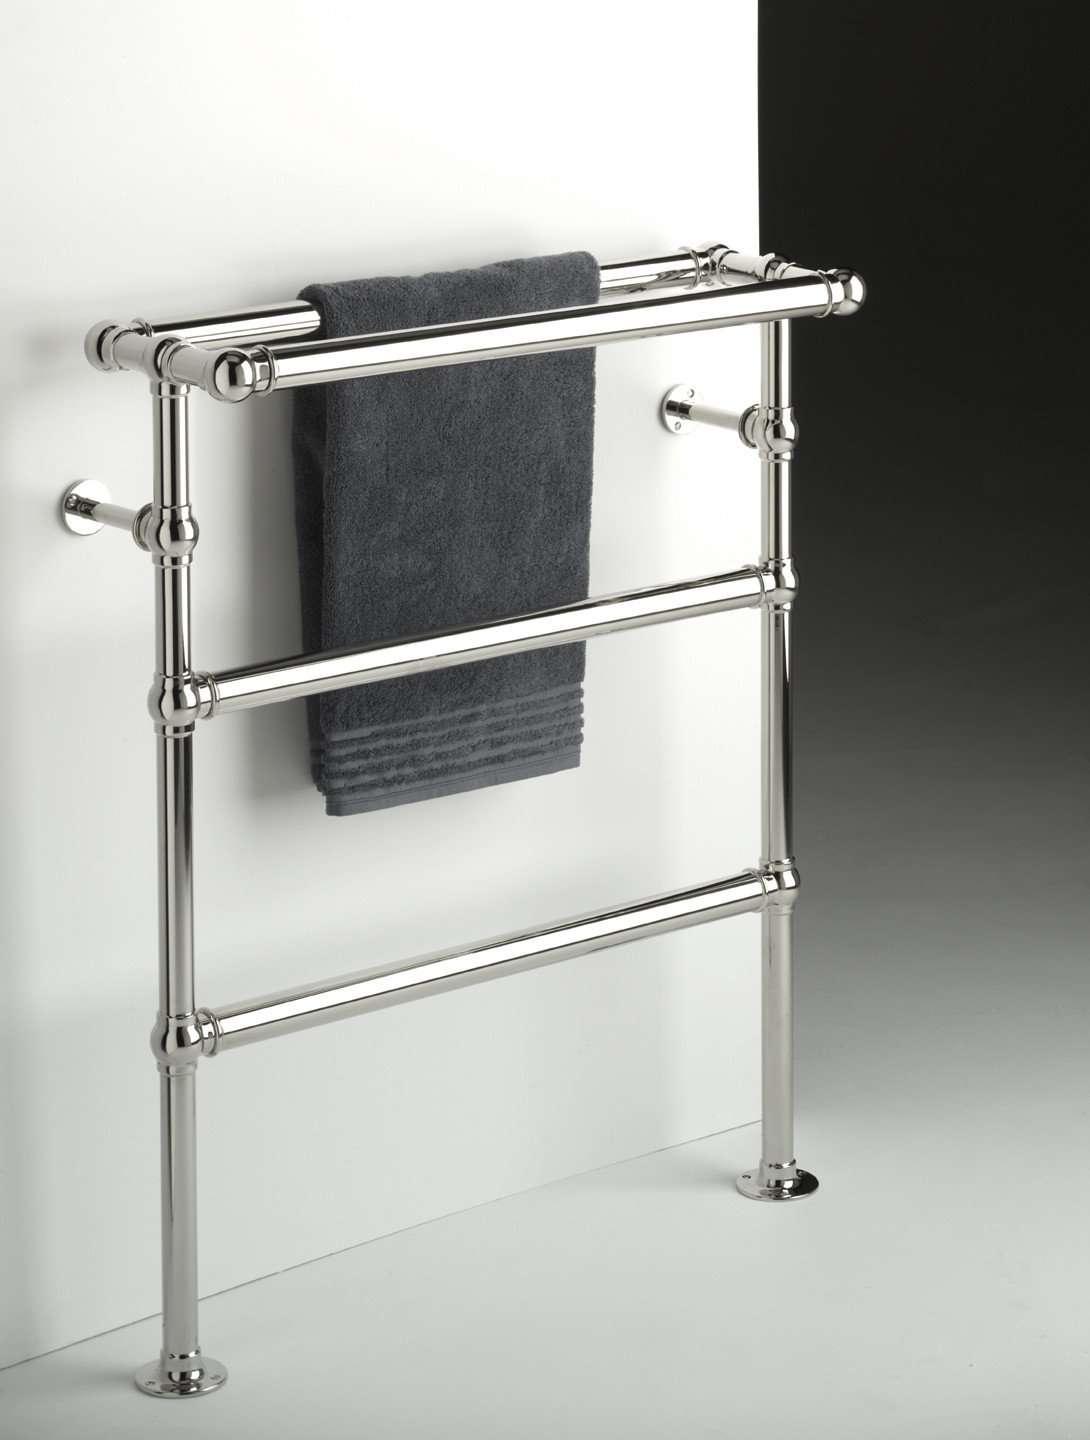 Why the Sterlingham Stourton/3 Rail Wall Mount Hardwired Towel